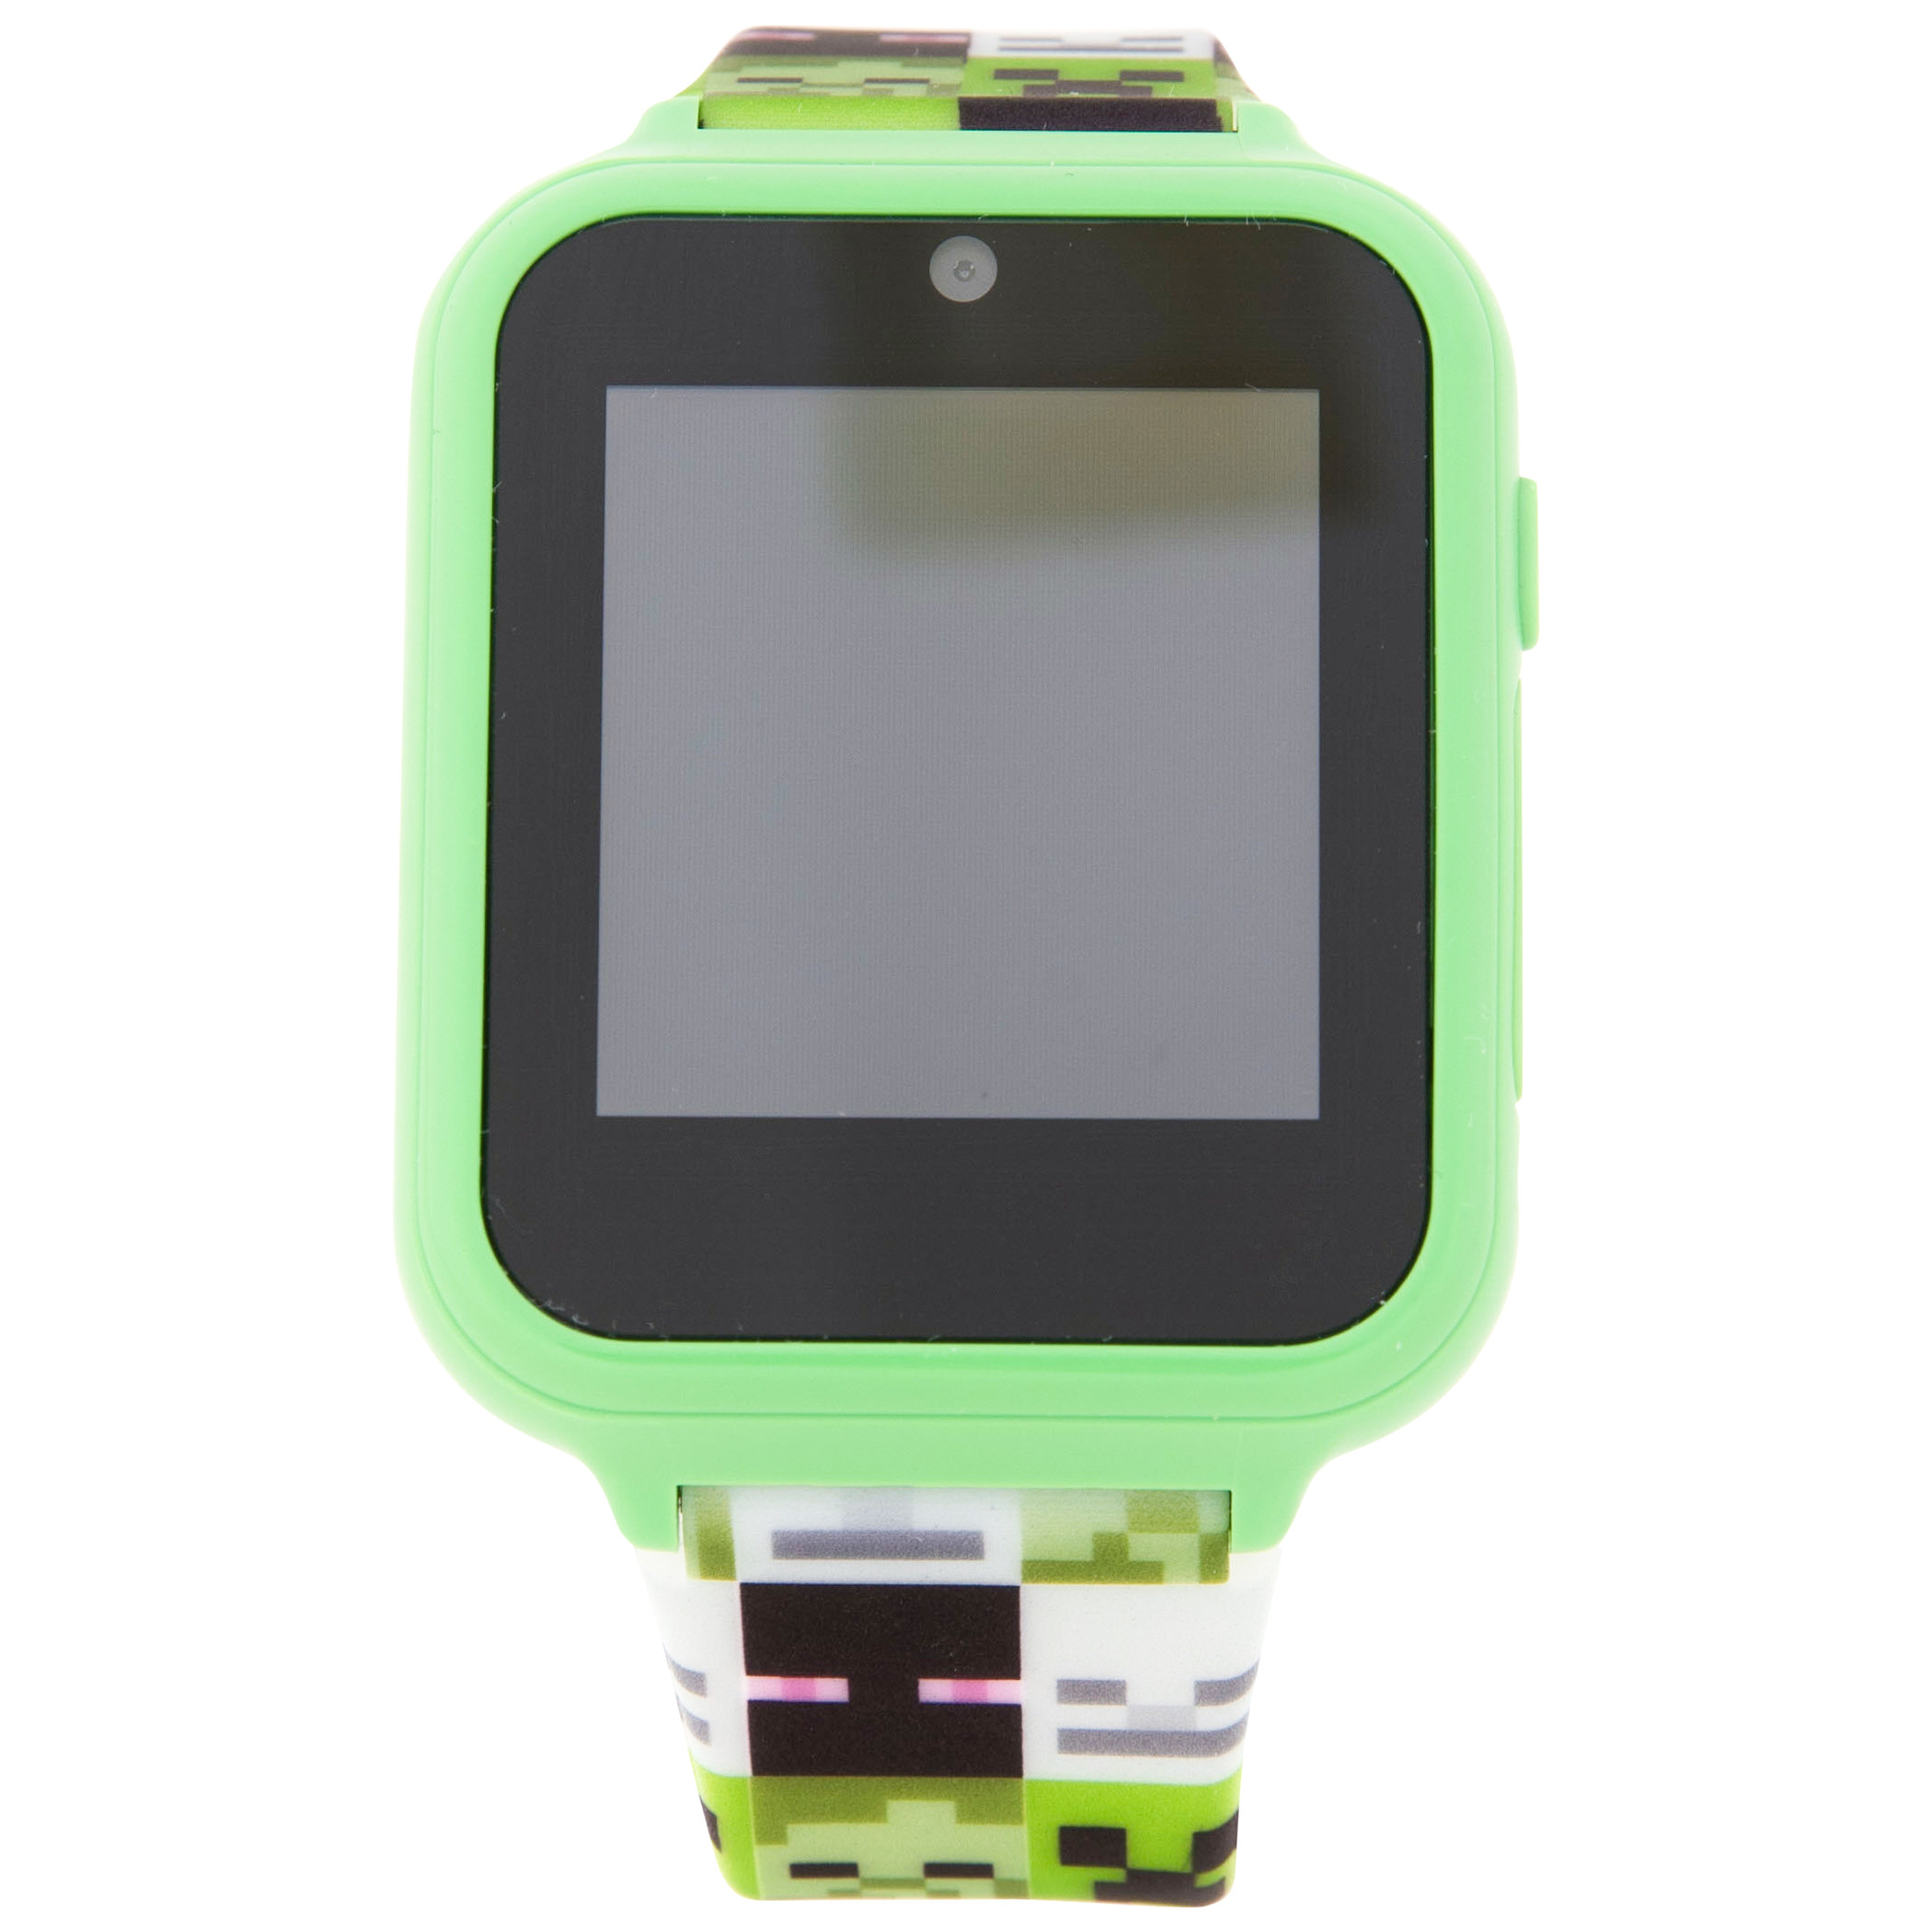 Minecraft Creeper LED Kid's Watch With Silicone Band